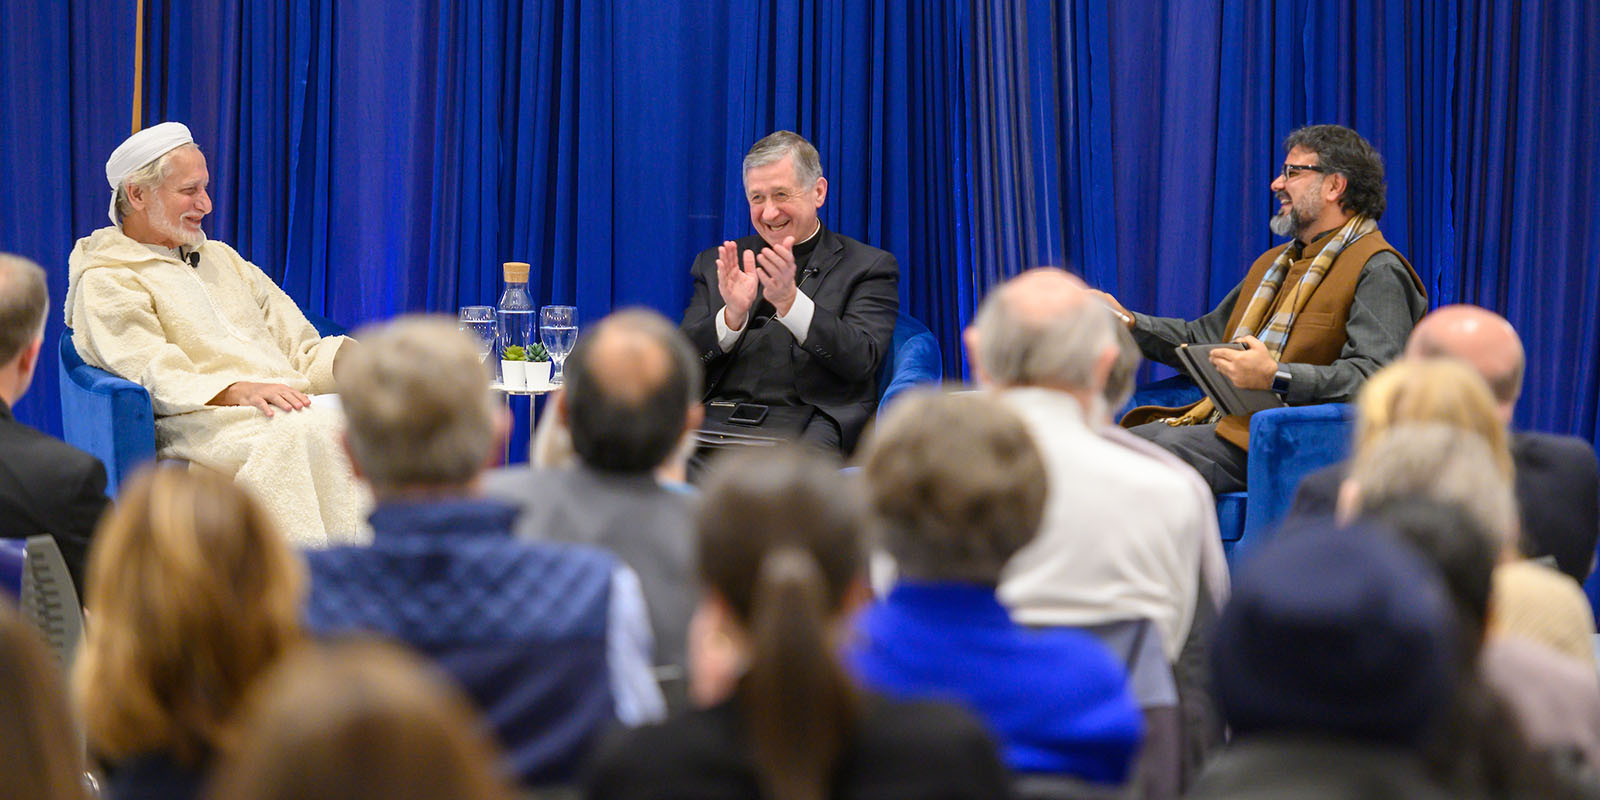 November 20, 2019; (left to right) Daoud Casewit, President of the American Islamic College, Cardinal Blase J. Cupich, Archbishop of Chicago, and moderator Mahan Mirza, executive director for the Rafat and Zoreen Ansari Institute for Global Engagement with Religion take part in a discussion hosted by the Keough School of Global Affairs called "Commemorating the Sultan and the Saint: A Christian-Muslim Dialogue," in the Nanovic Forum. (Photo by Matt Cashore/University of Notre Dame)